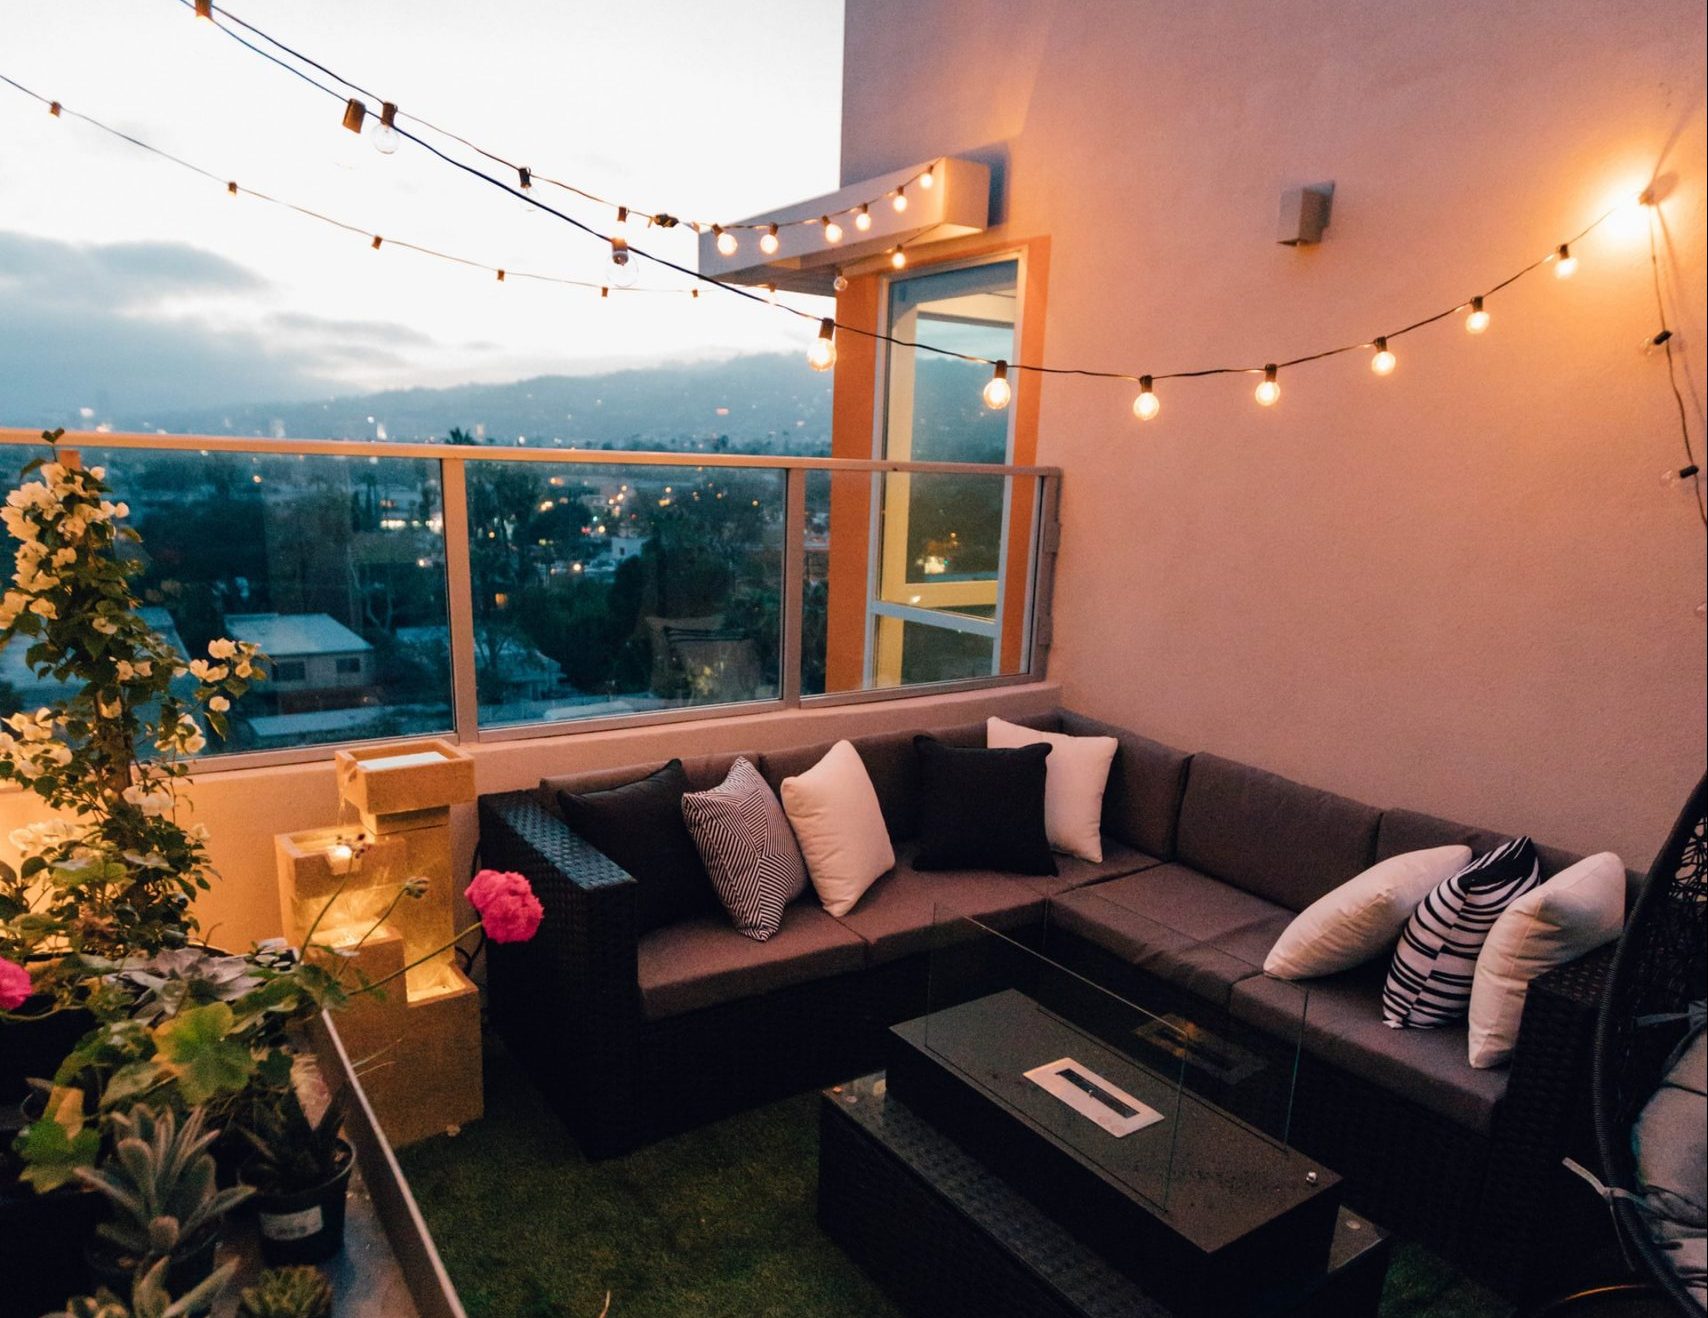 Lighting for a small balcony – which to choose?